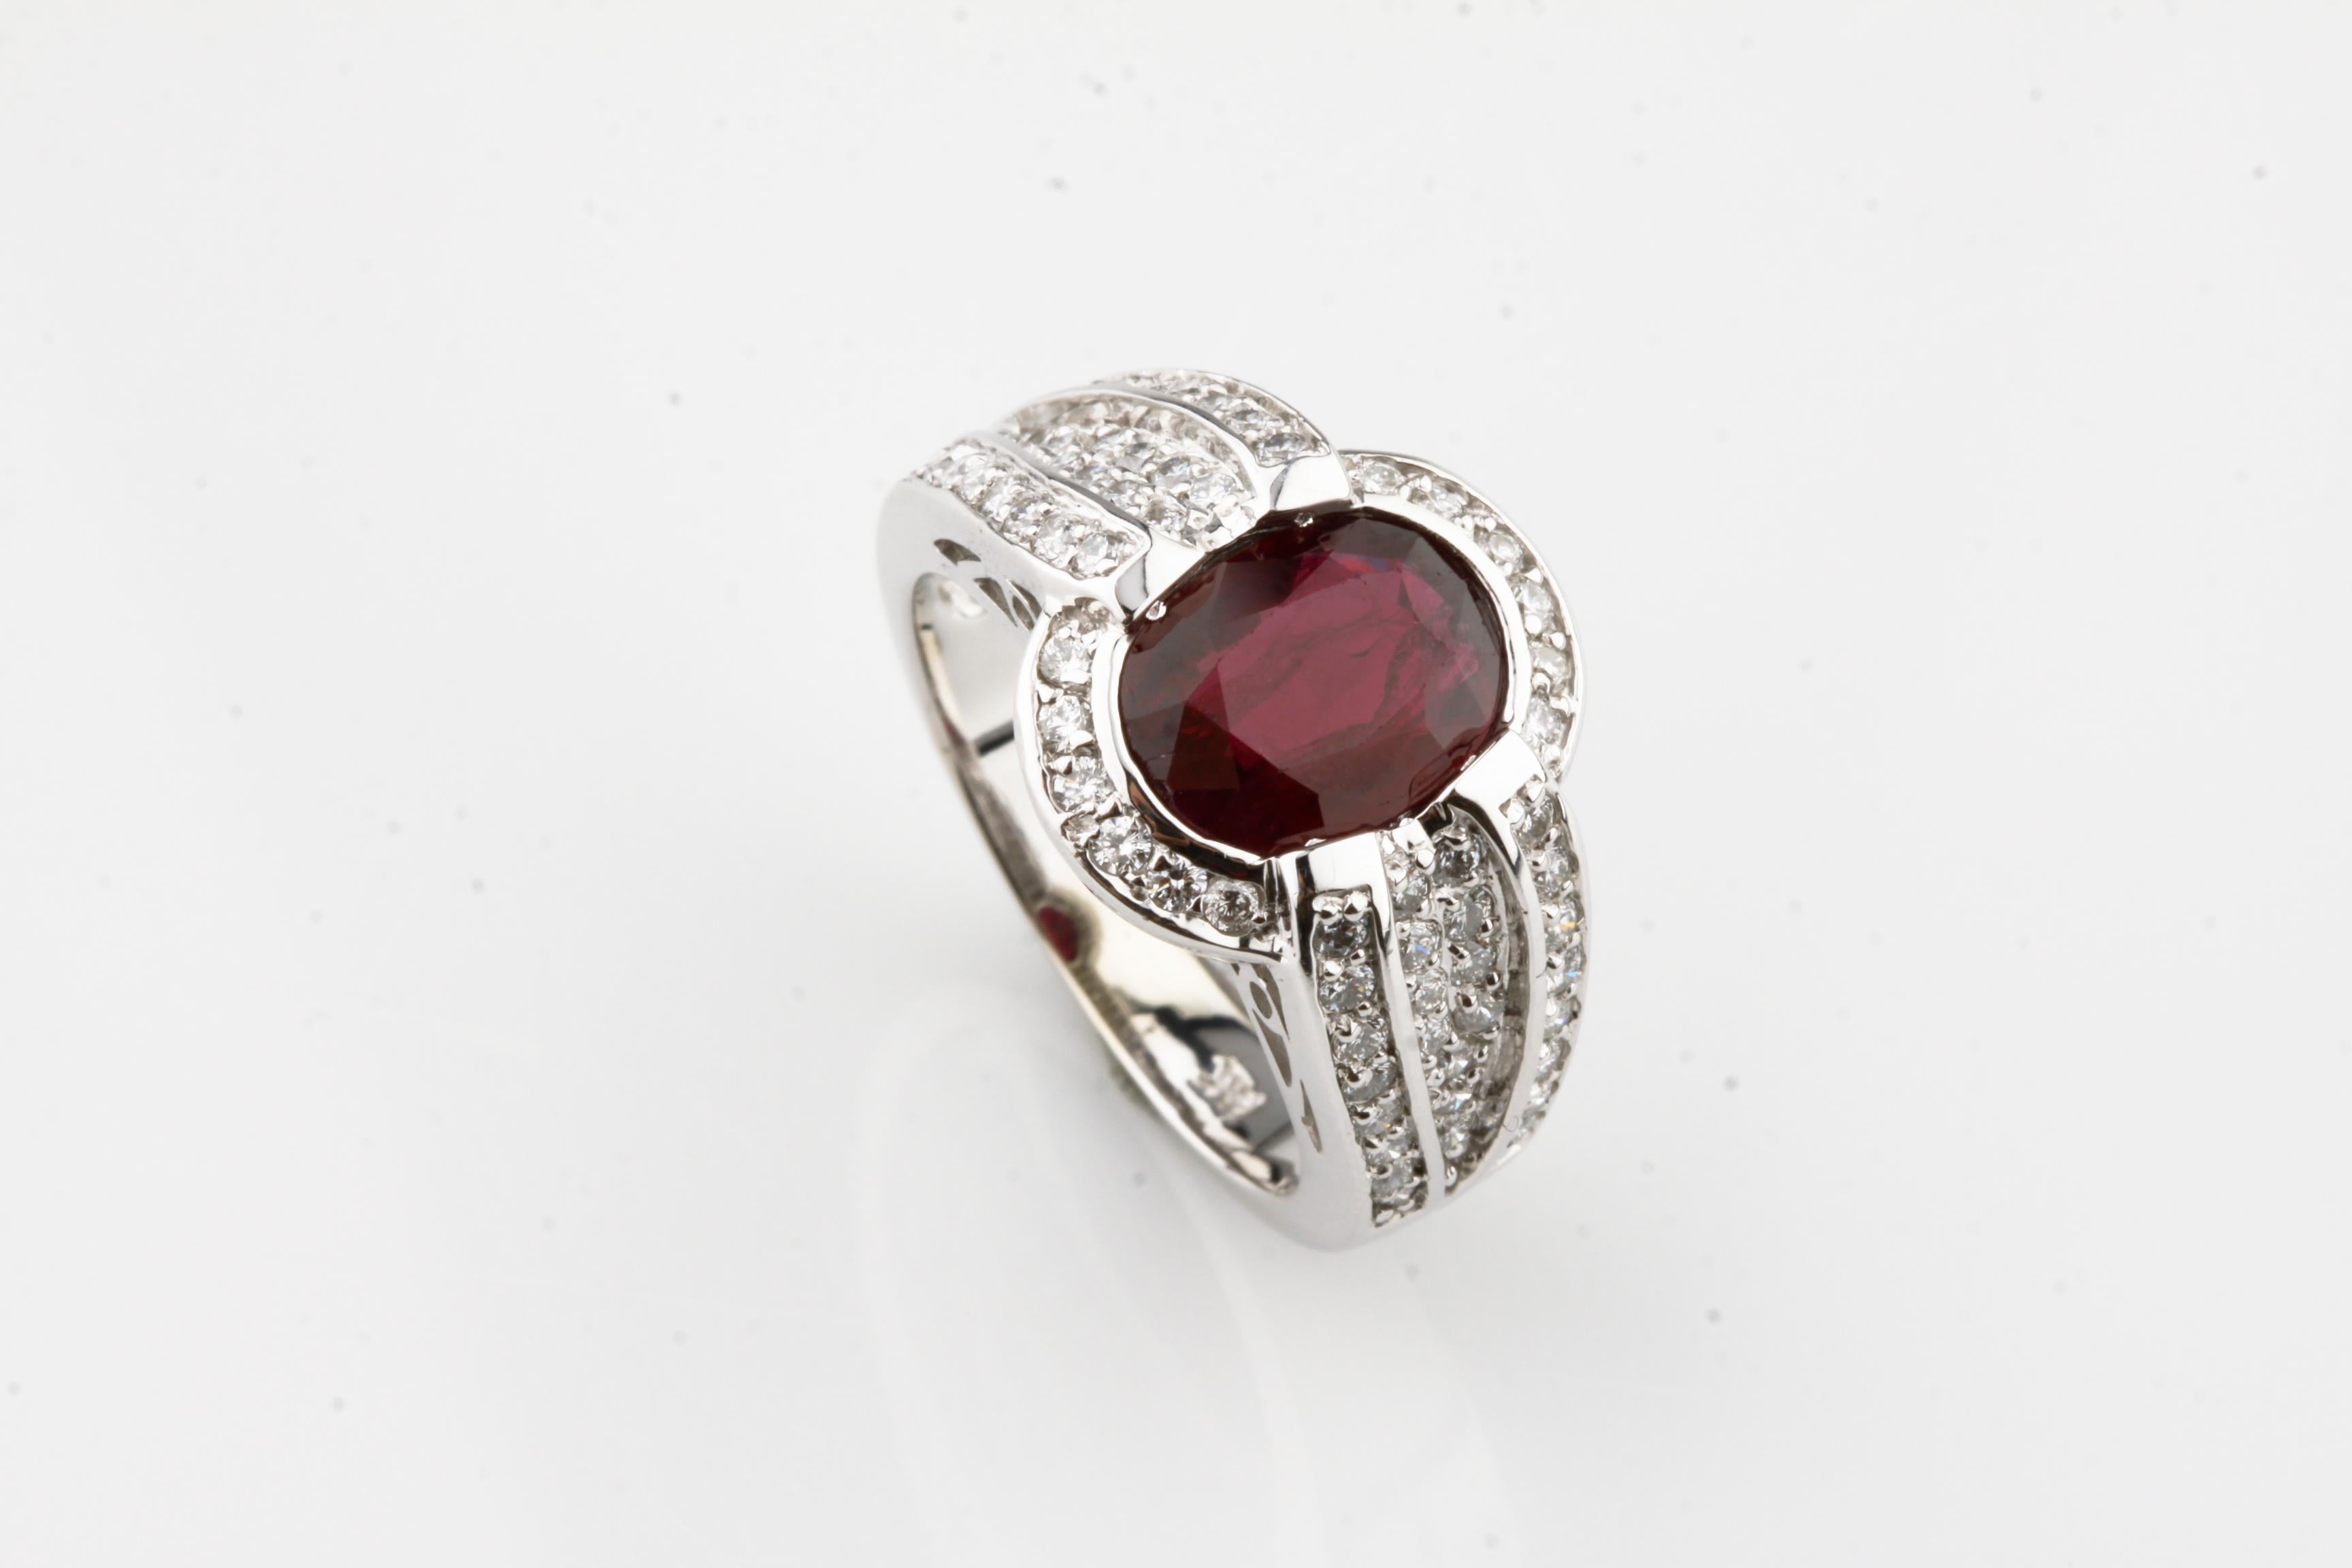 14k White Gold Oval Natural Ruby Ring w/ Diamond Accents TCW = 3.49 ct
Gorgeous Natural Ruby Solitaire Ring with Diamond Accents
Total Ruby Weight = 2.35 ct
Total Diamond Weight = 1.14 ct
Total Mass = 7.1 grams
Size 6.75
Beautiful Piece!